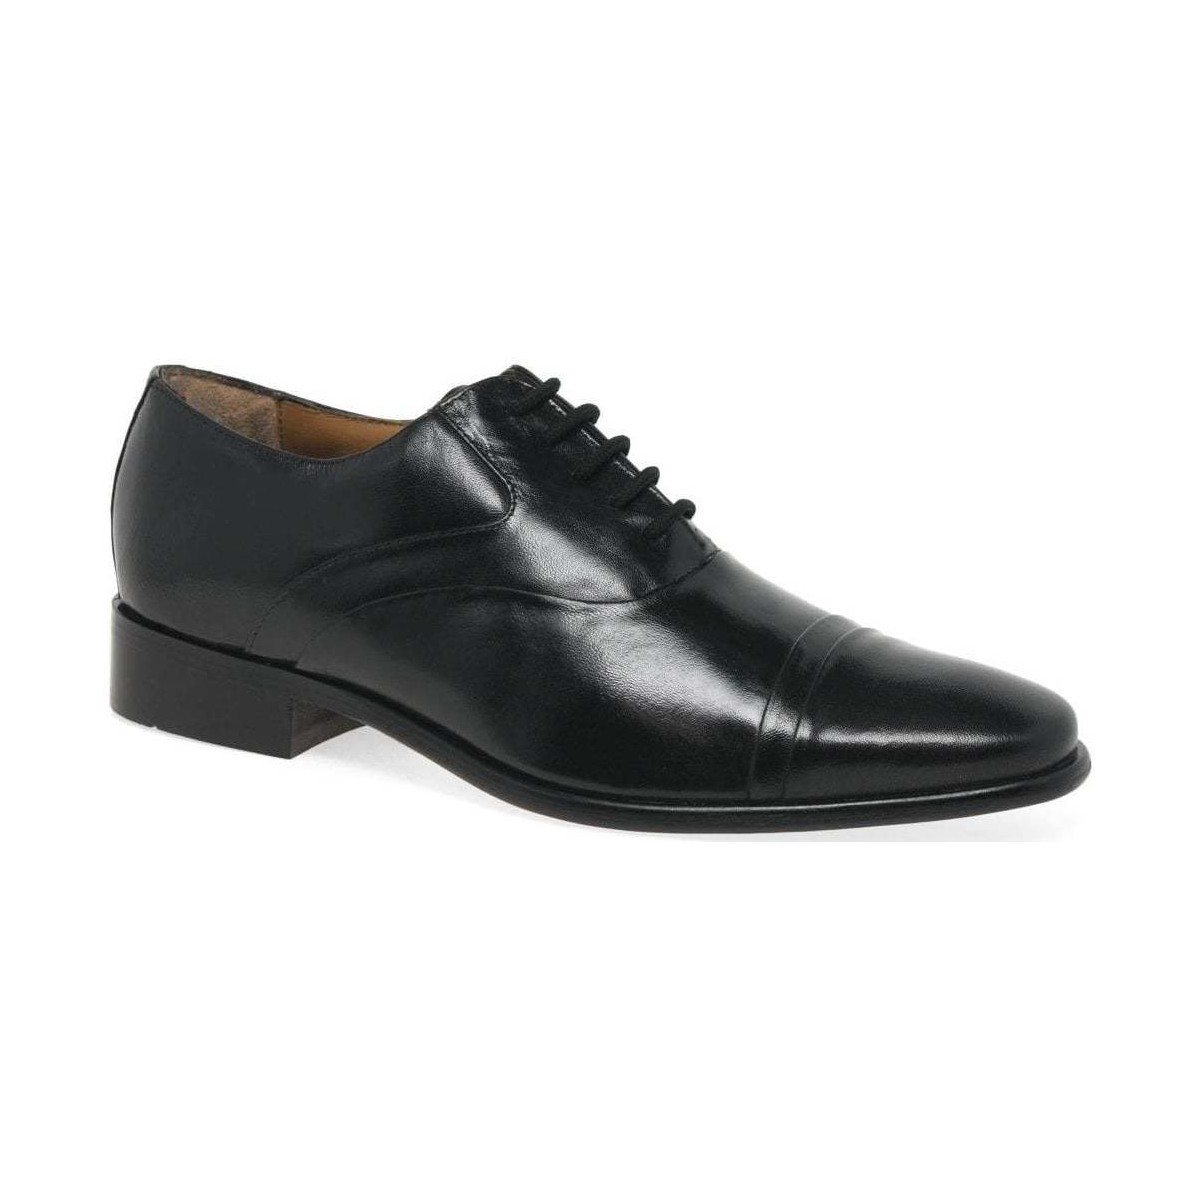 Shoes Men Derby Shoes & Brogues Rombah Wallace Westminster Mens Formal Shoes Black